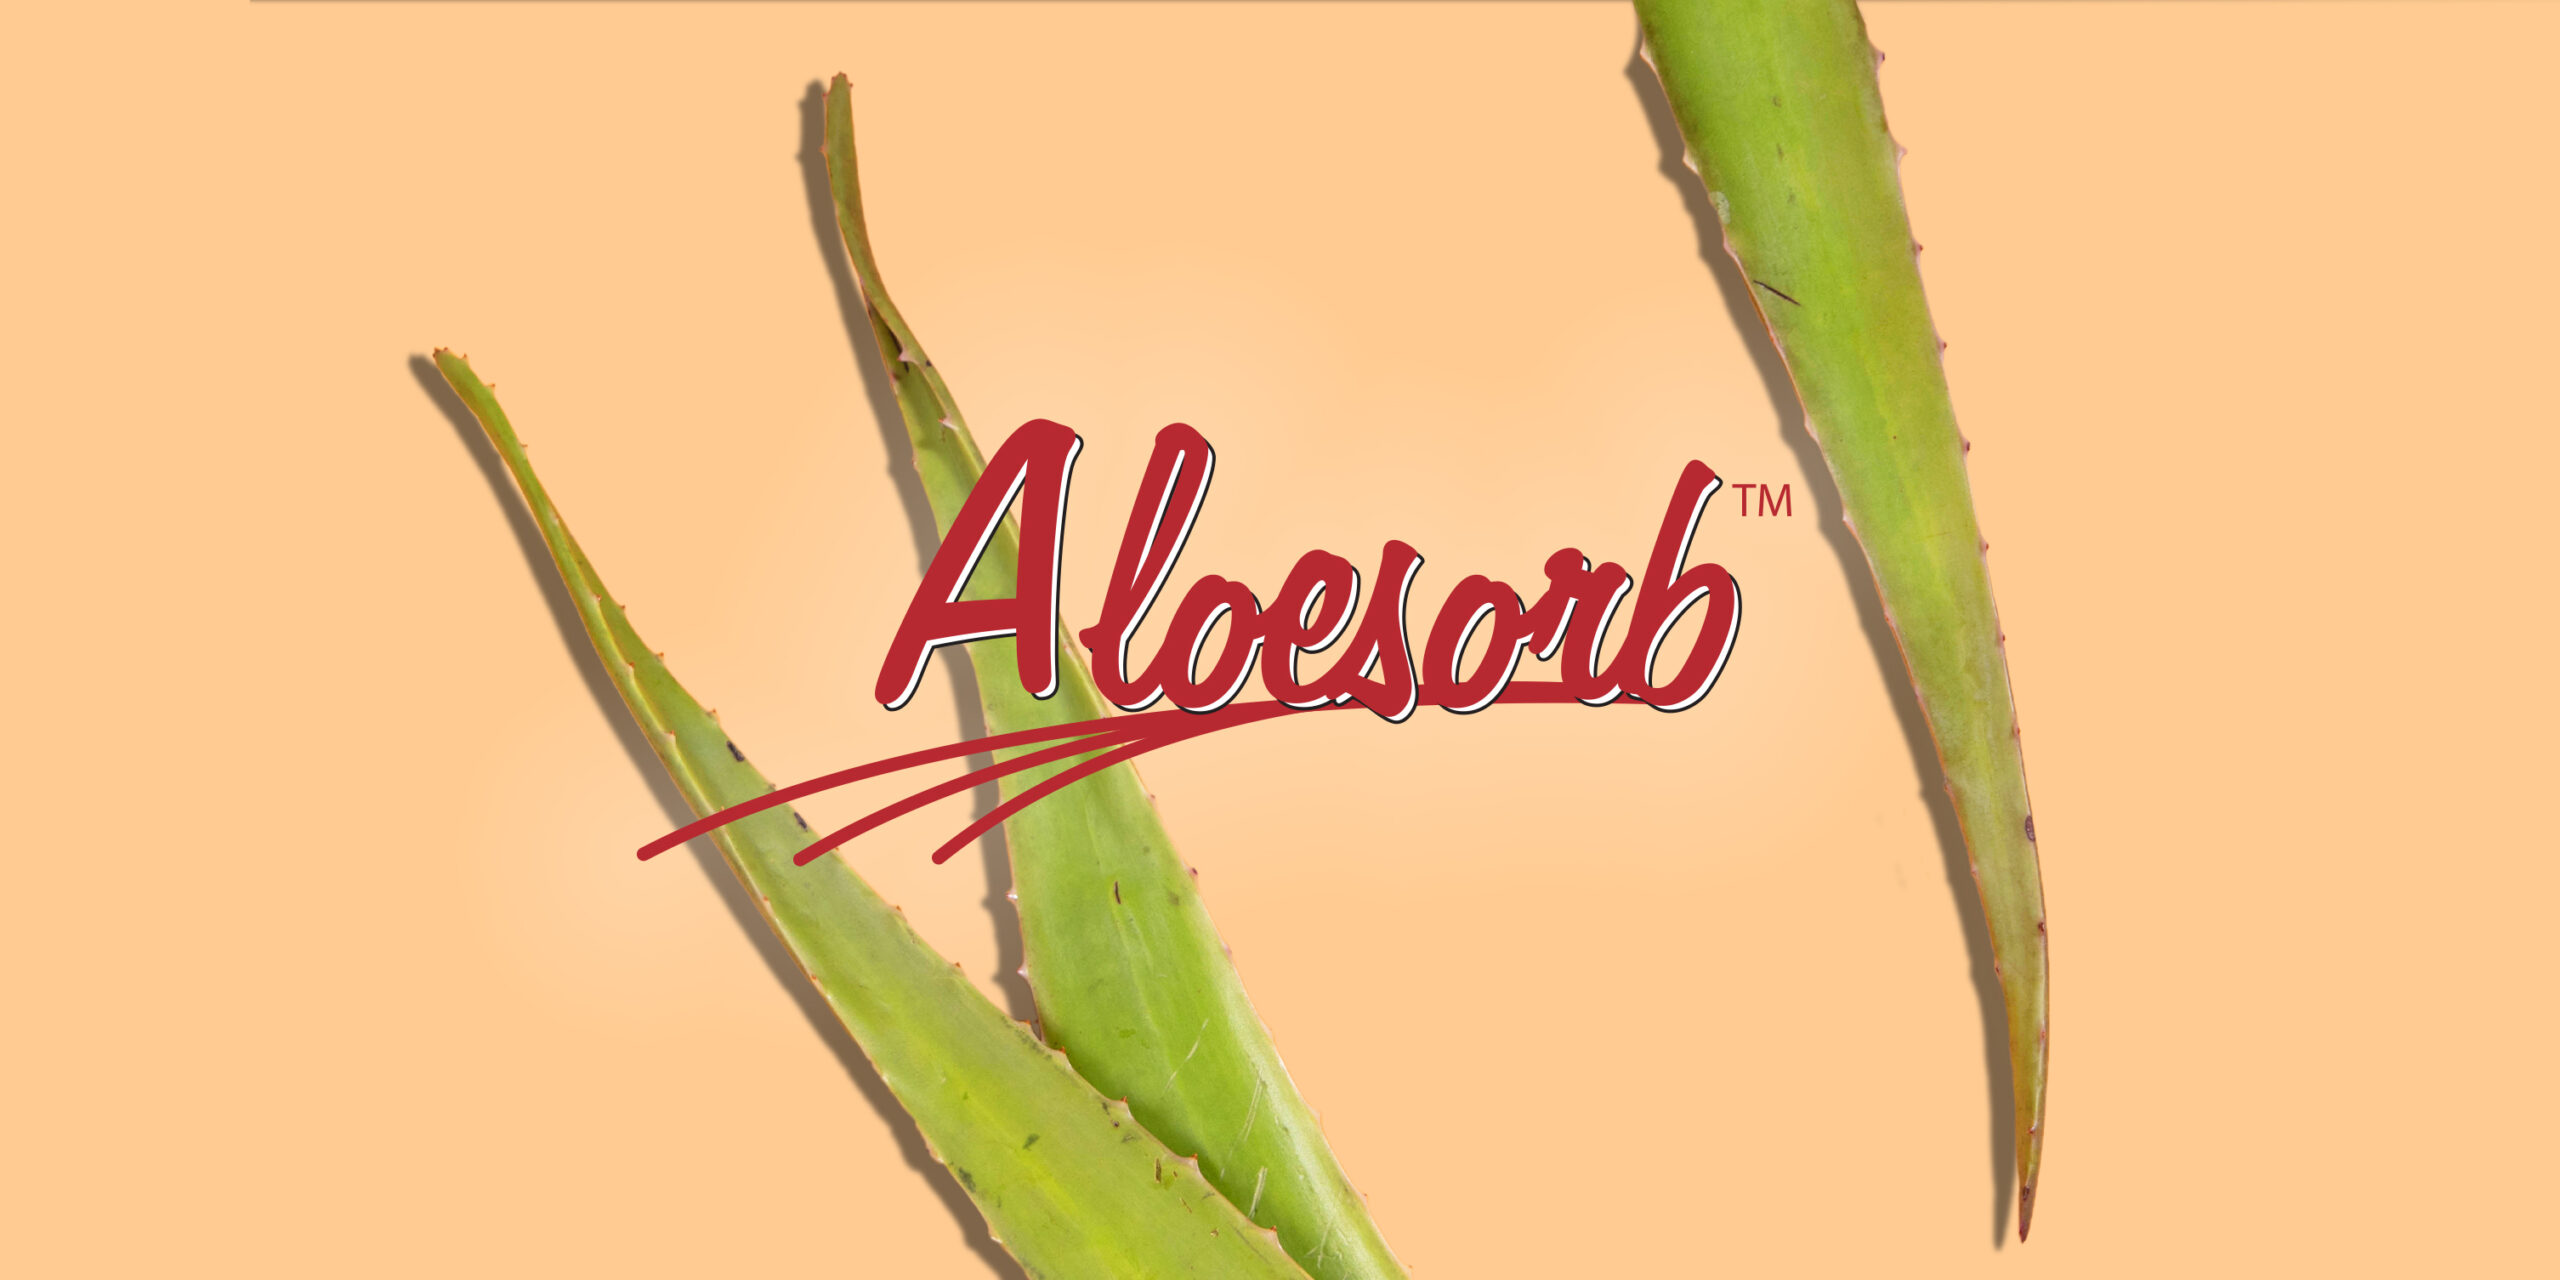 Why Aloesorb Makes Aloe Better - Lily of the Desert